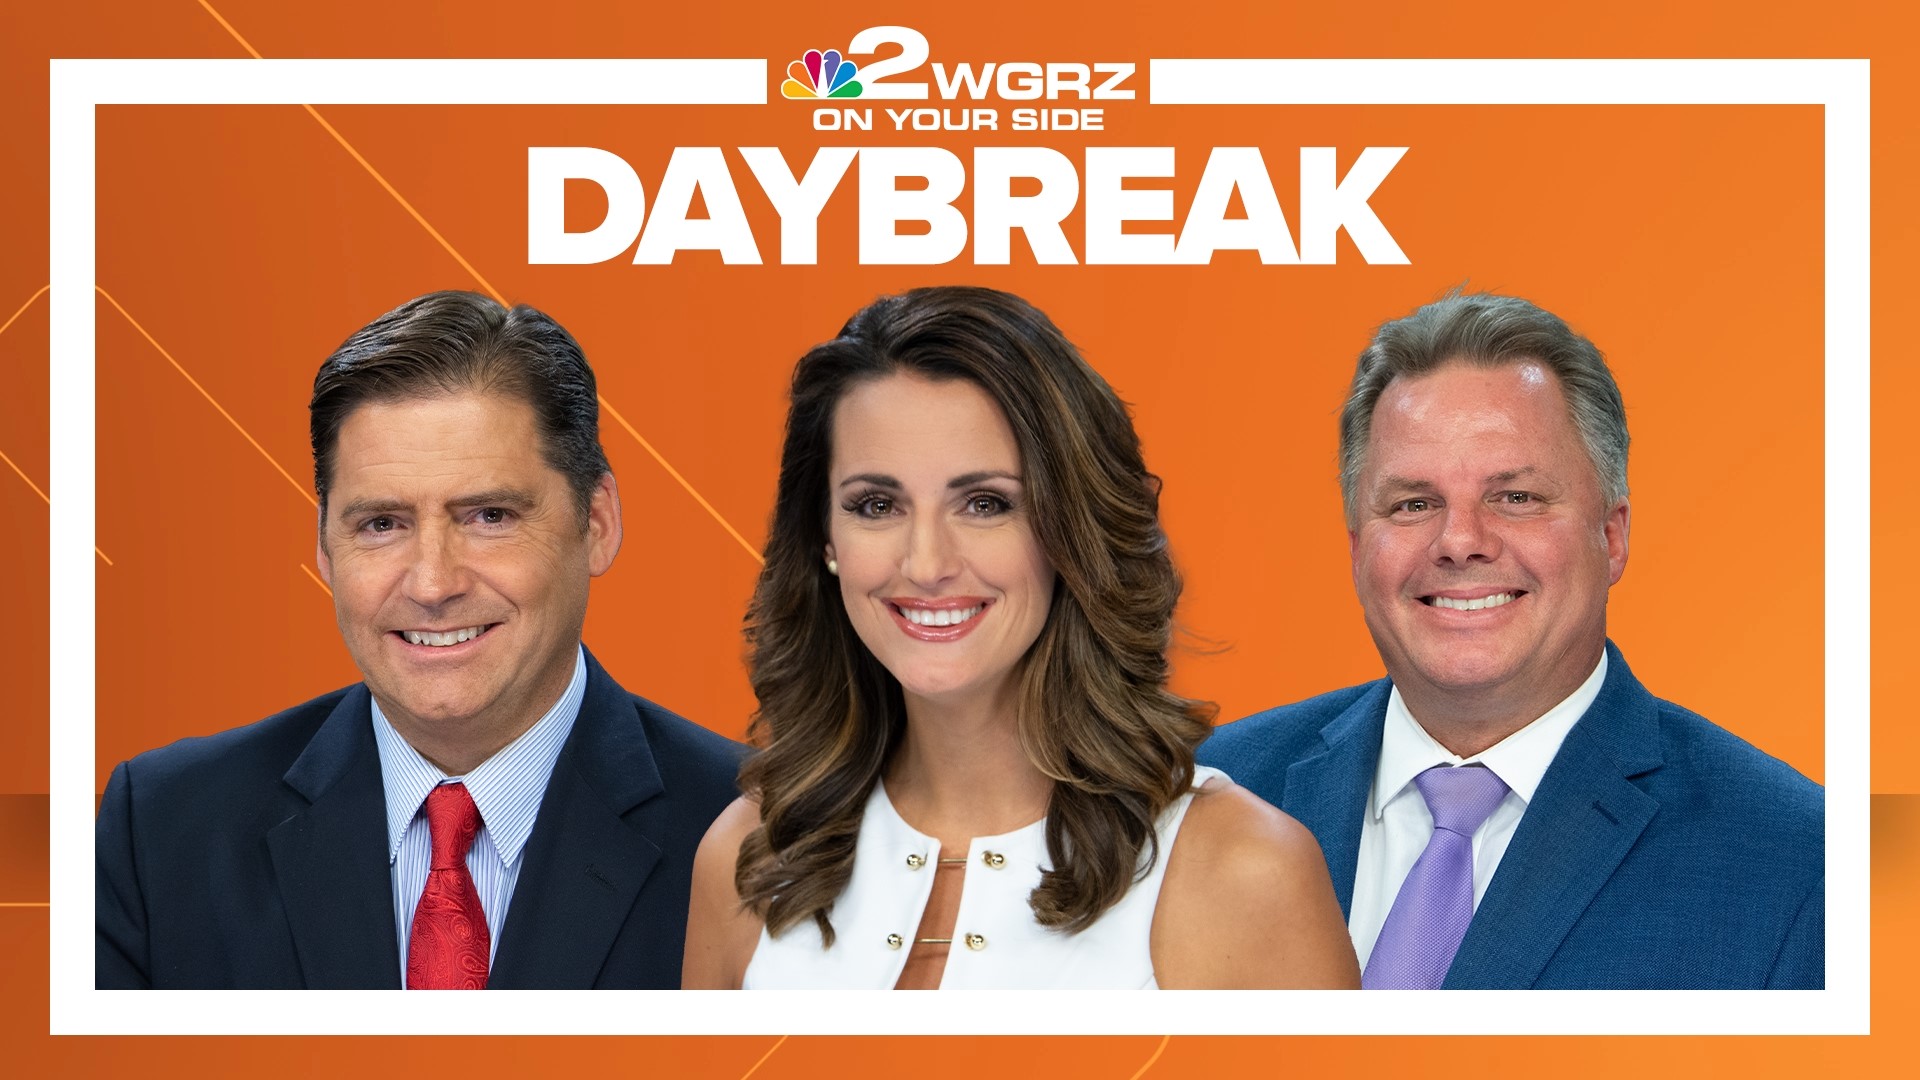 The Channel 2 Morning News Team provides a comprehensive look at updated news events, a detailed and up-to-the-minute weather forecast and sports scores.